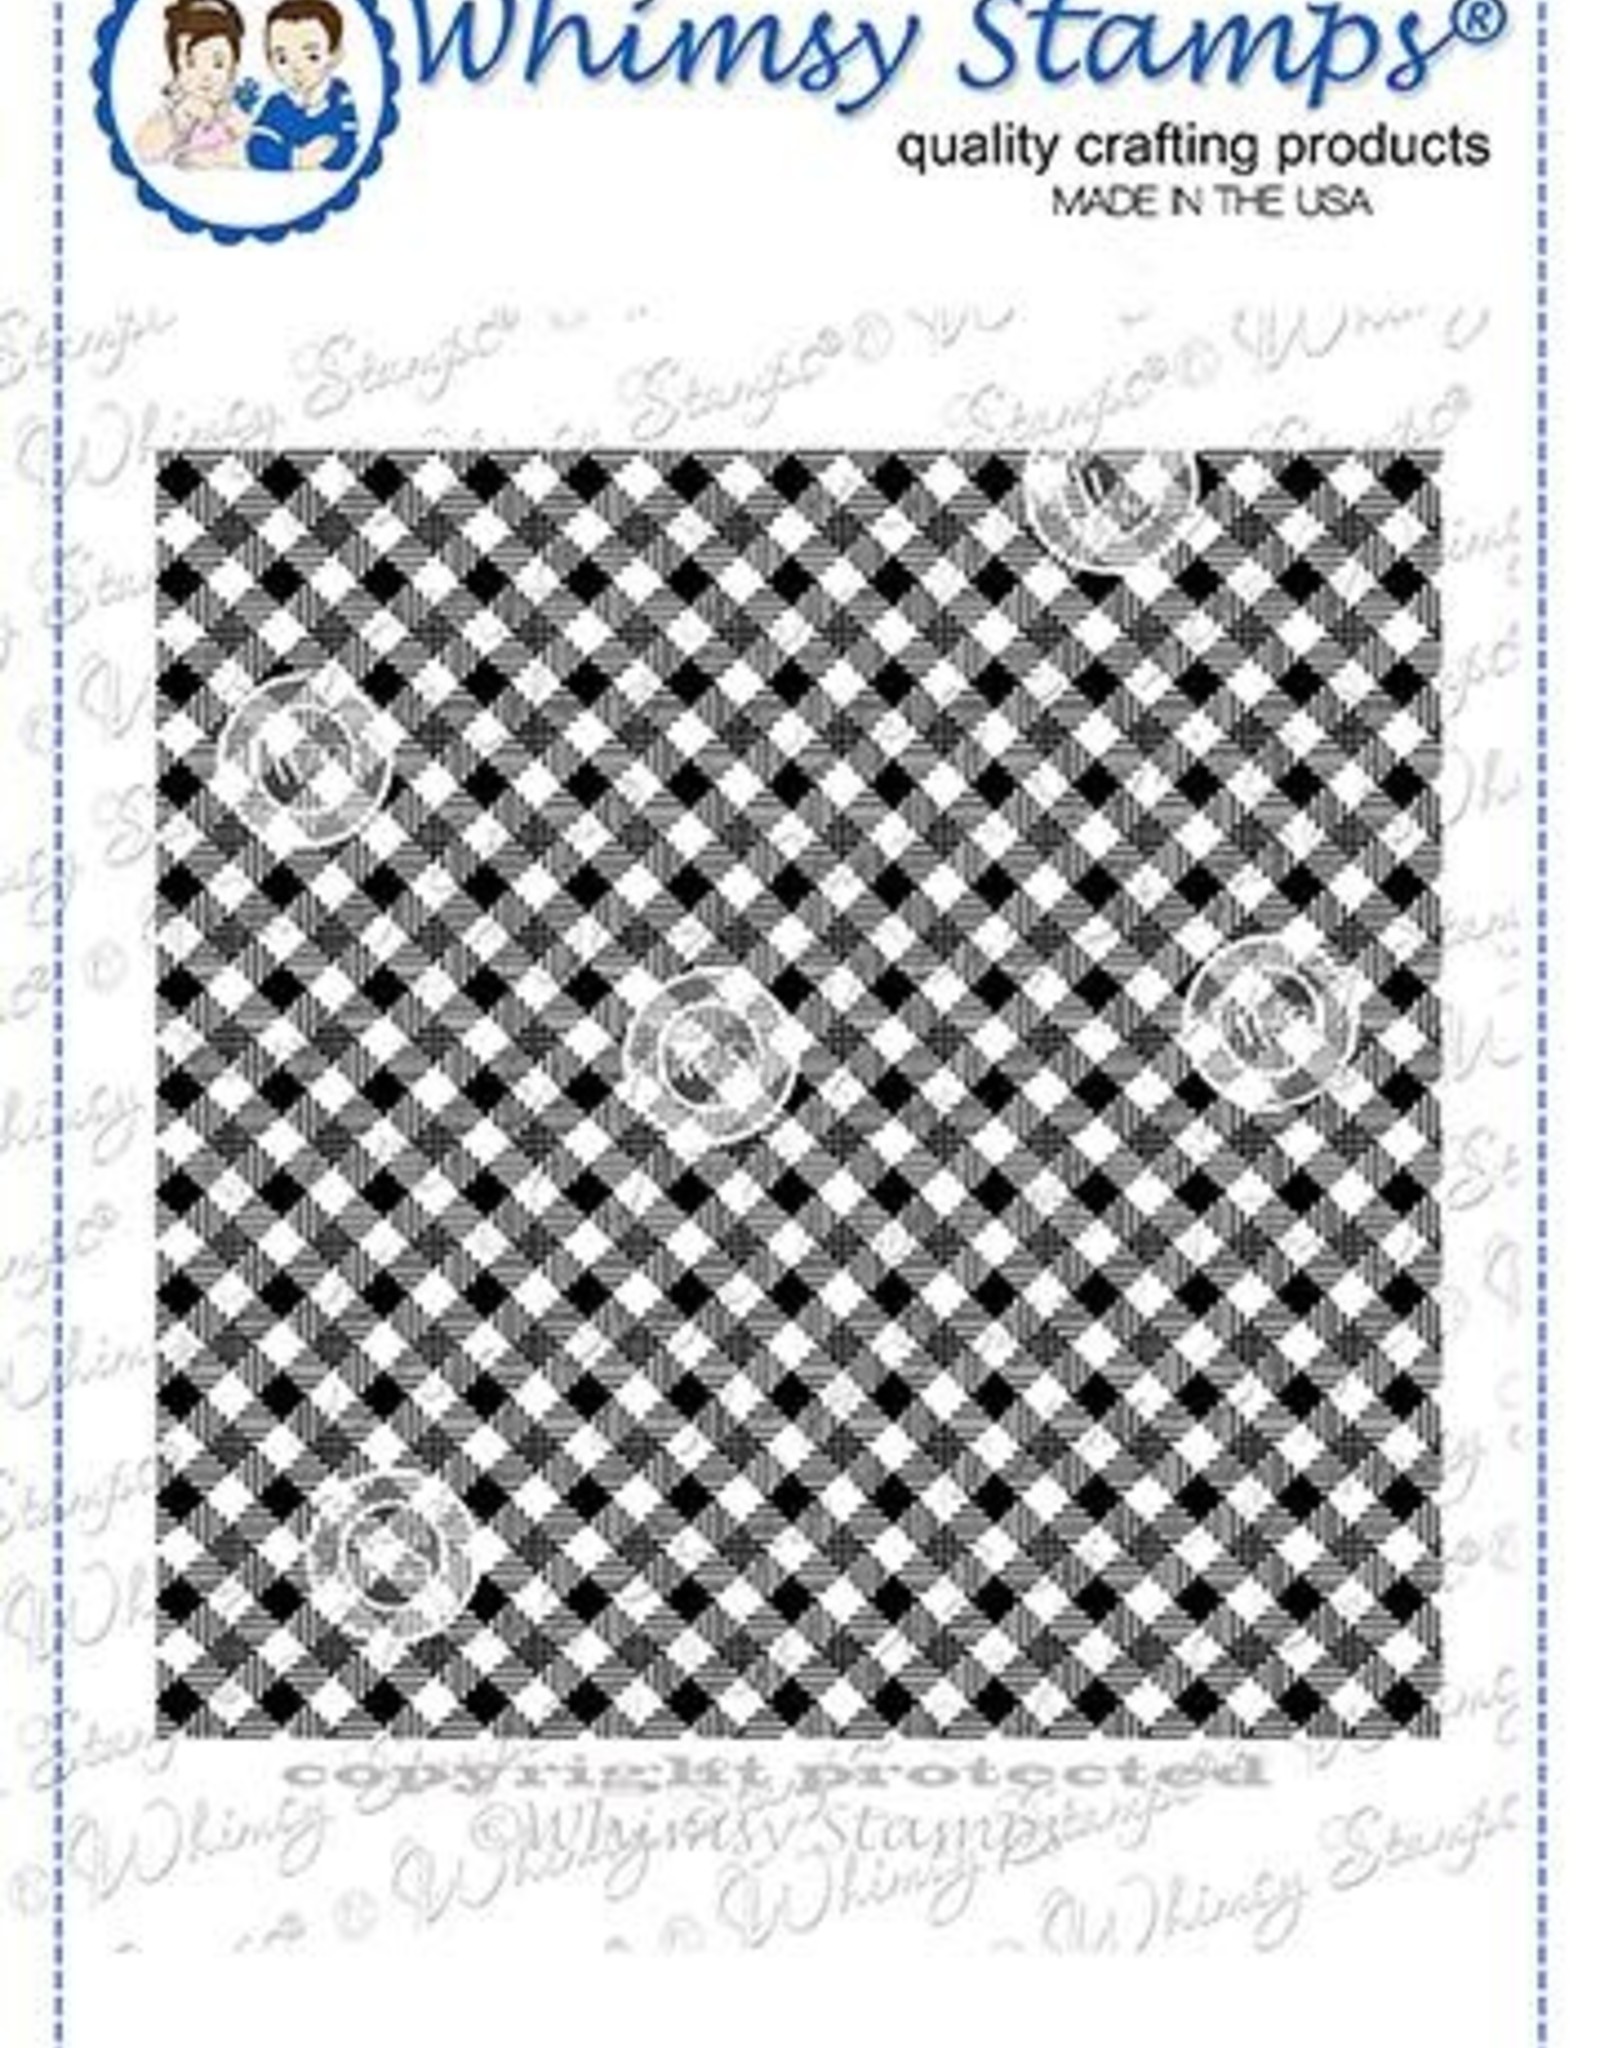 Whimsy Stamps Whimsy Stamps Criss Cross Gingham Background Rubber Cling Stamp